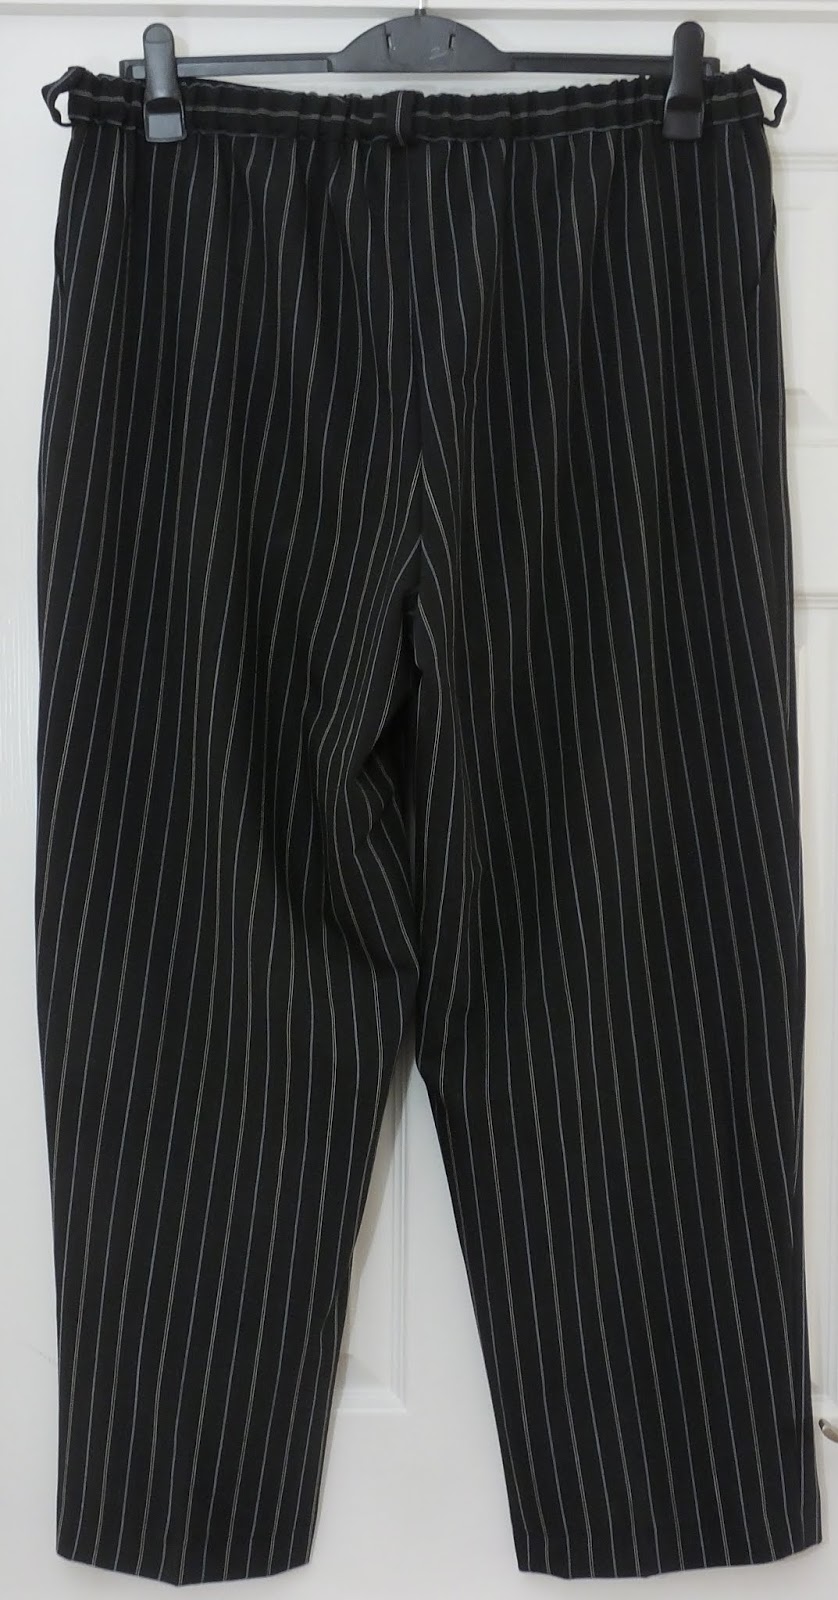 Sew Ruthie Style: Black striped trousers finished